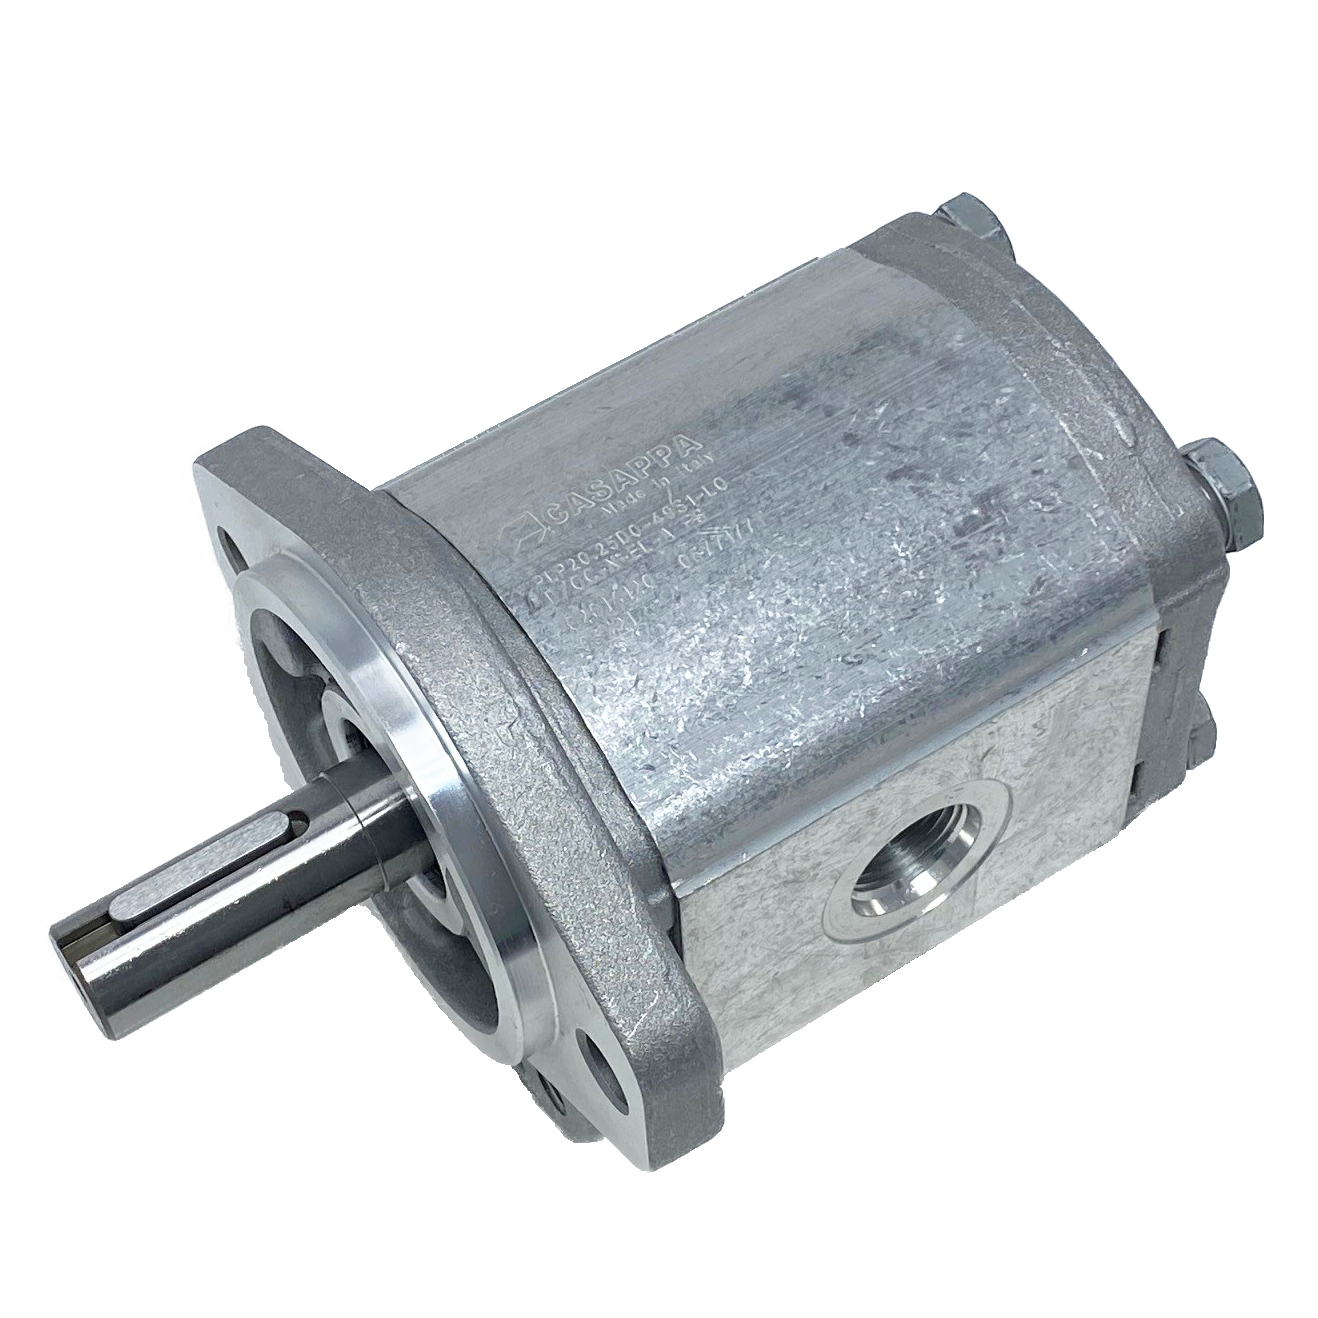 PHP20.25S0-49S9-LOG/OC-N-EL : Casappa Polaris Gear Pump, 26.42cc, 3335psi Rated, 3000RPM, CCW, 3/4" Bore x 3/16" Key Shaft, SAE A 2-Bolt Flange, 1.25" #20 SAE Inlet, 0.625 (5/8") #10 SAE Outlet, Cast Iron Body, Aluminum Flange